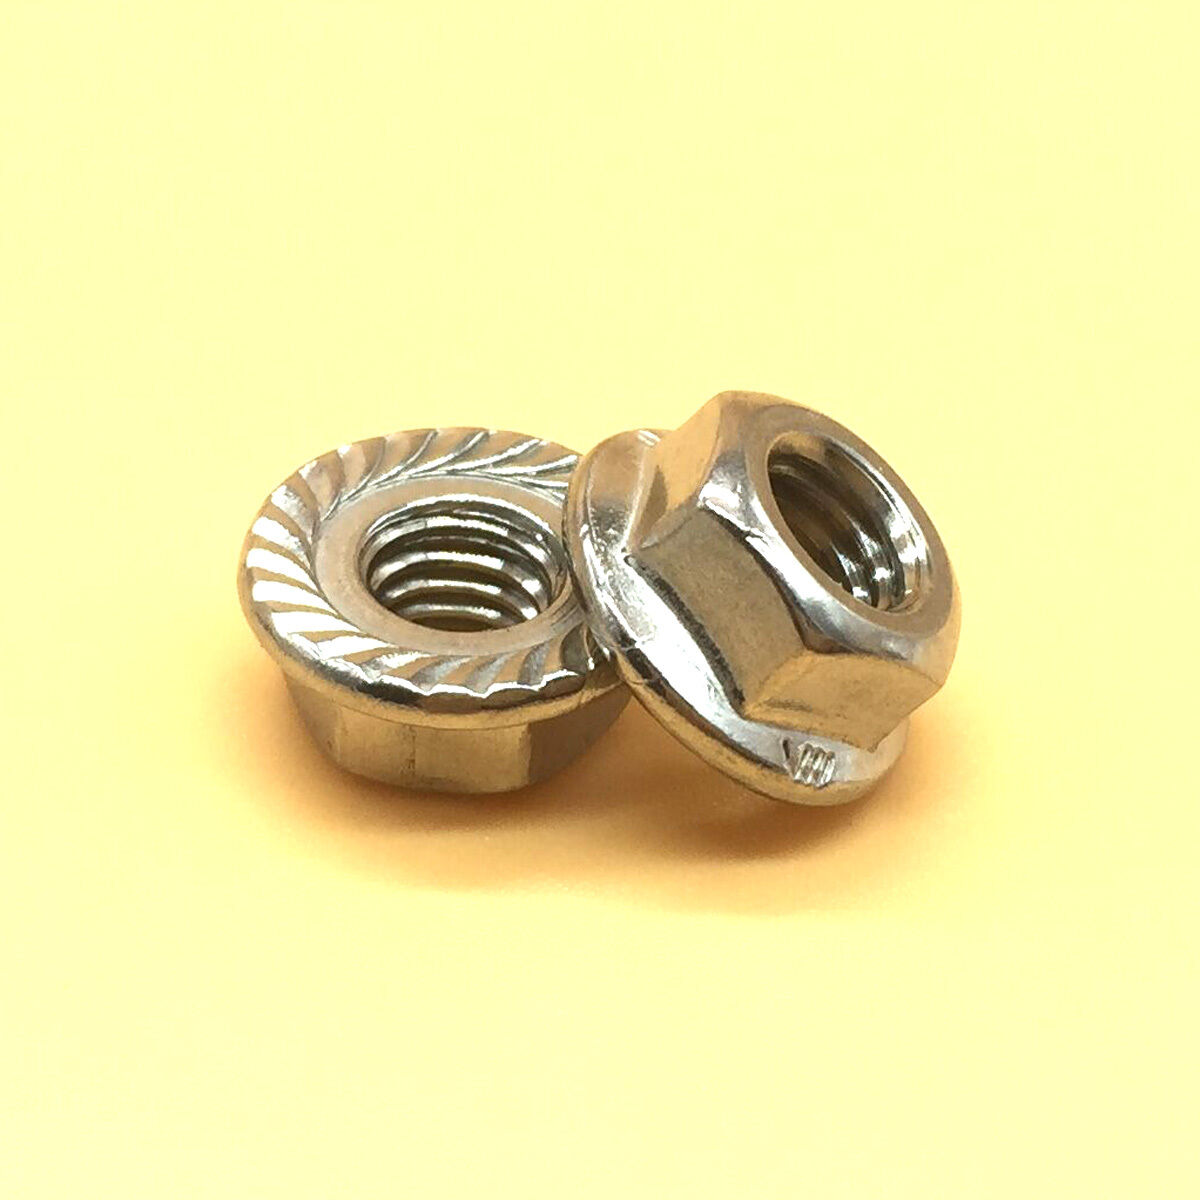 M3 x 0.5 Stainless Steel Flange Hex Nut Right Hand Thread 12Pcs [M1]